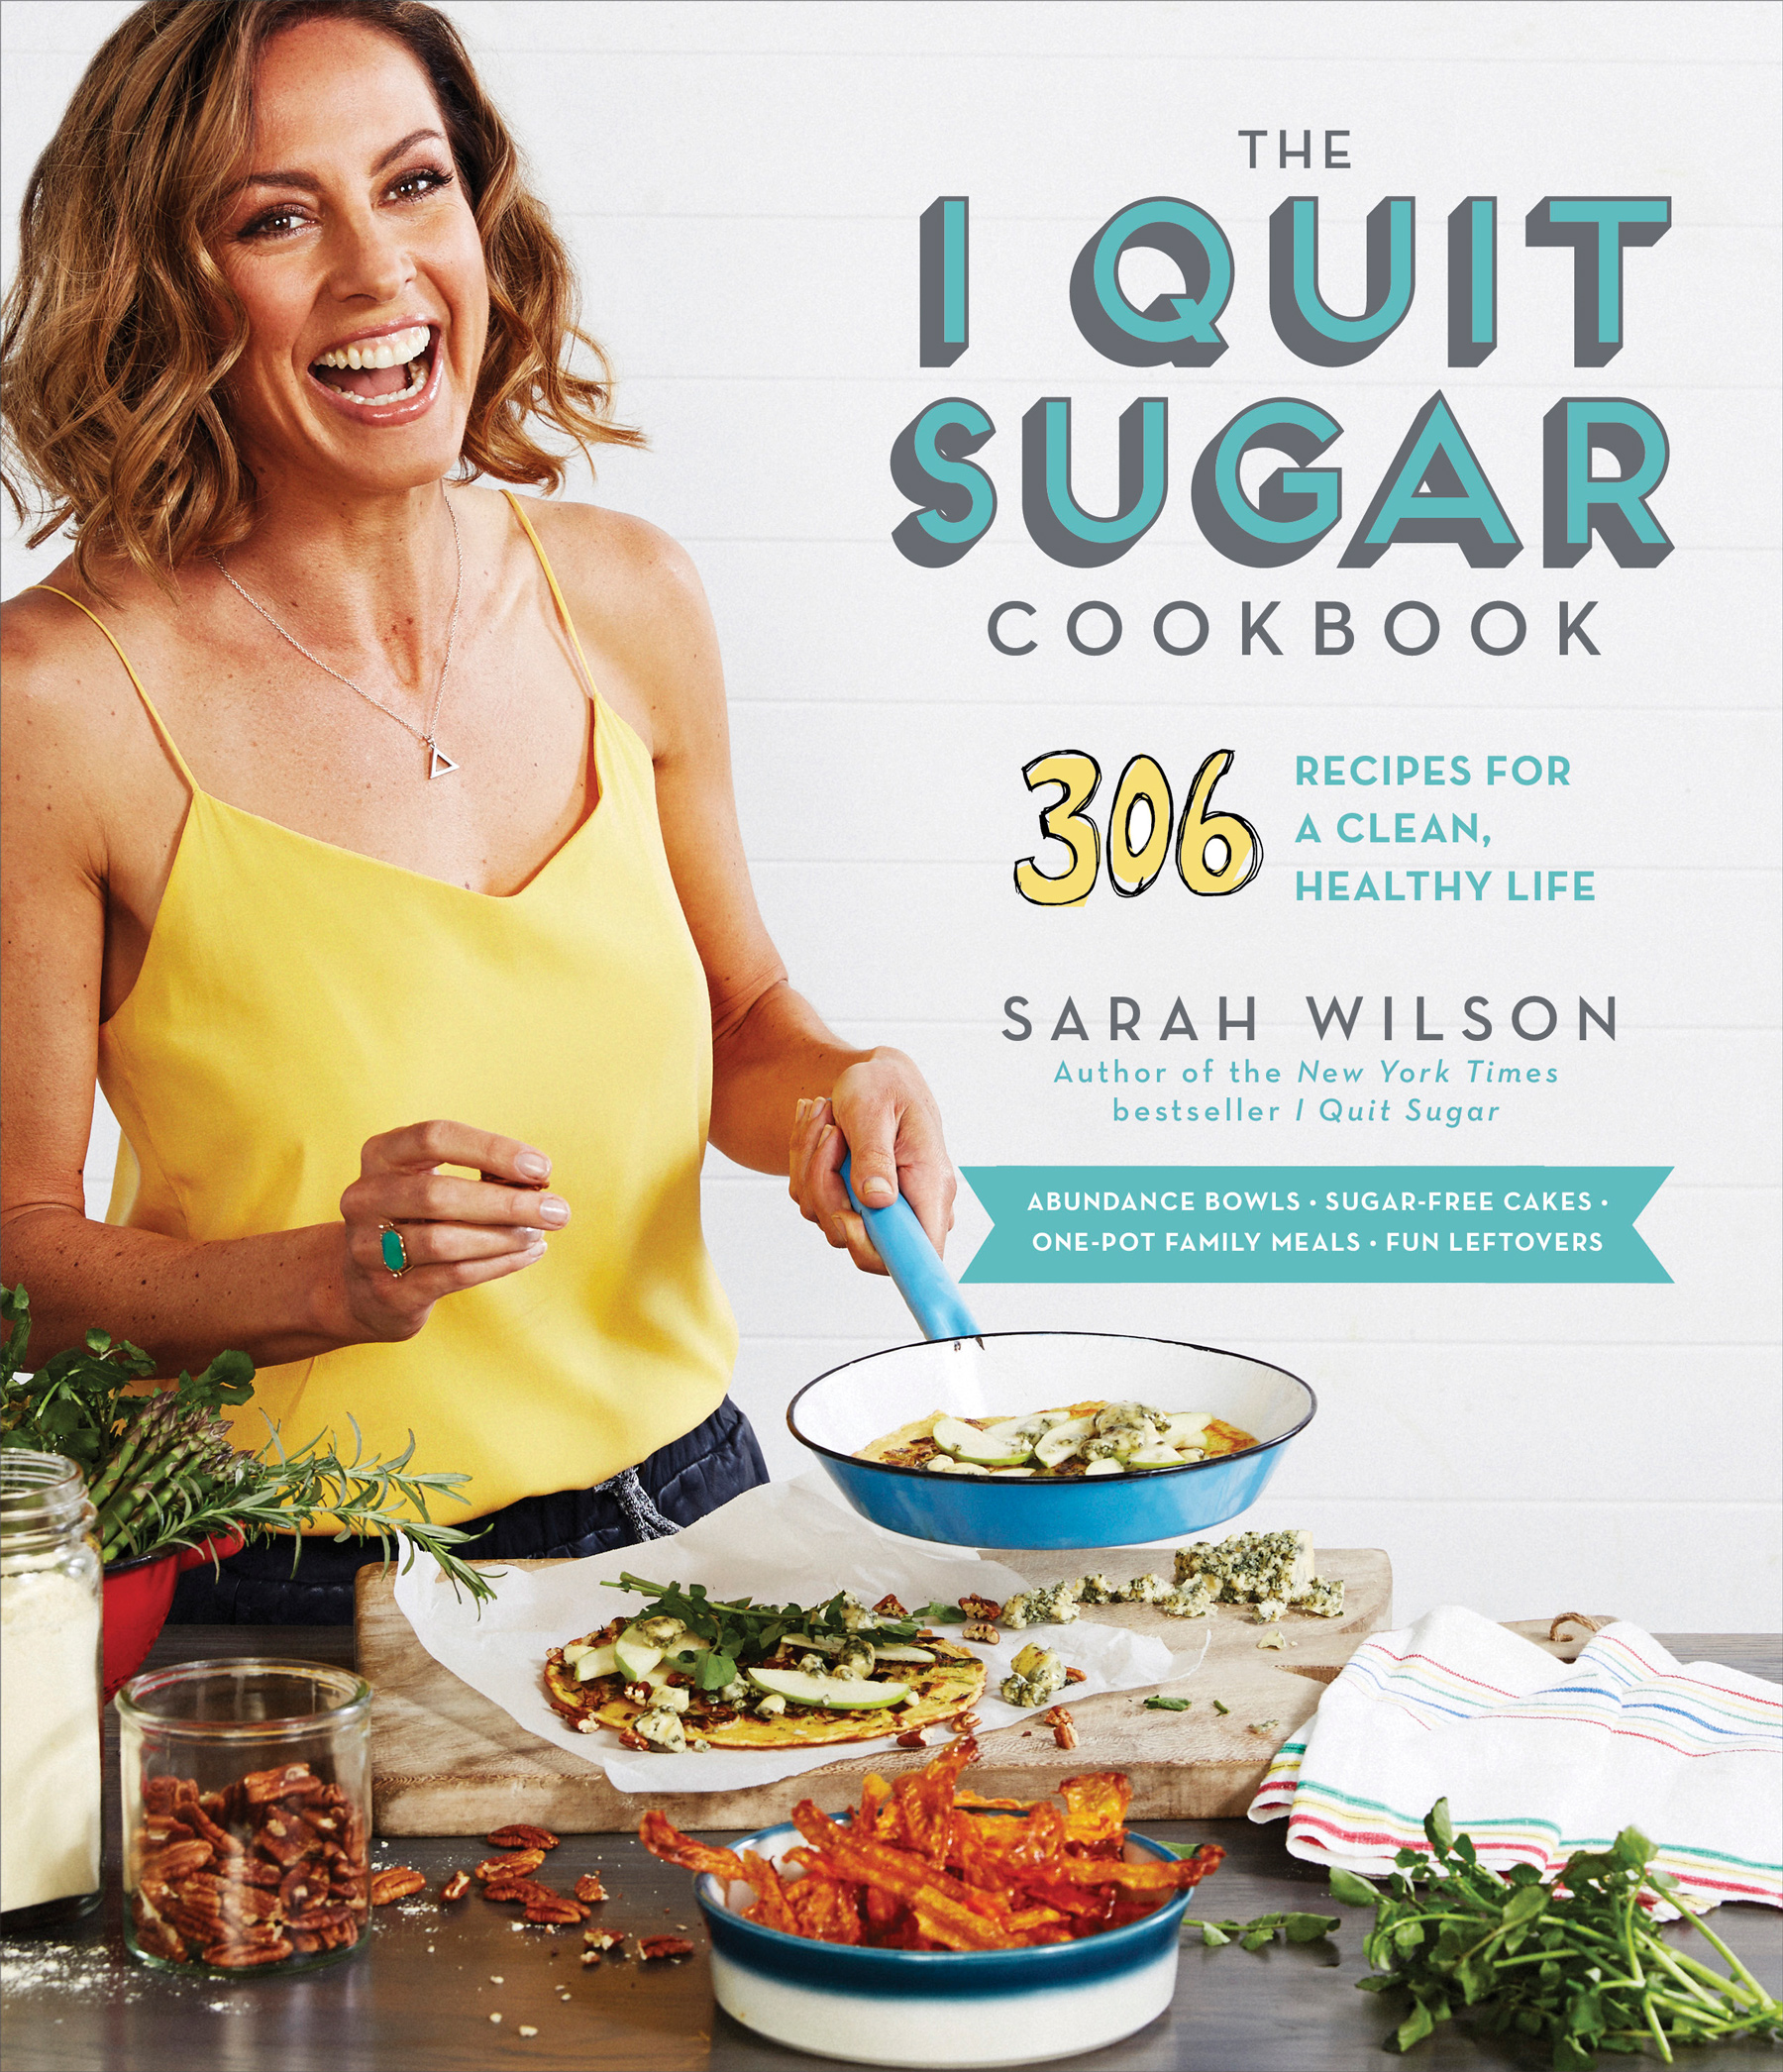 The I Quit Sugar Cookbook 306 Recipes for a Clean Healthy Life - photo 1